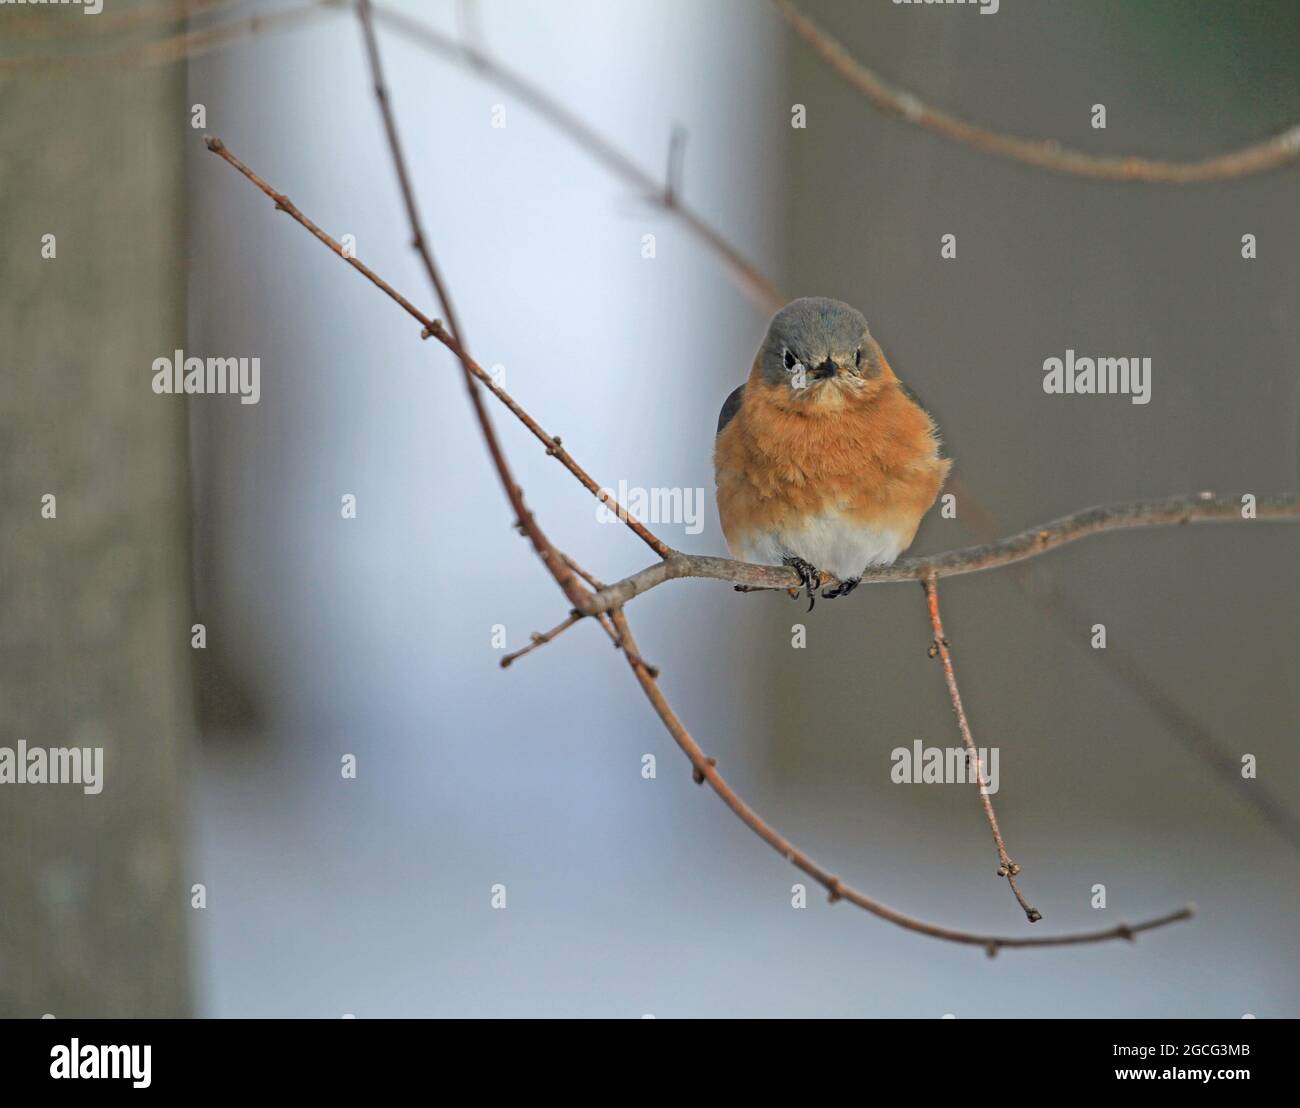 A female Eastern bluebird (Sialia sialis) perched on a branch of a maple tree during a New England winter Stock Photo